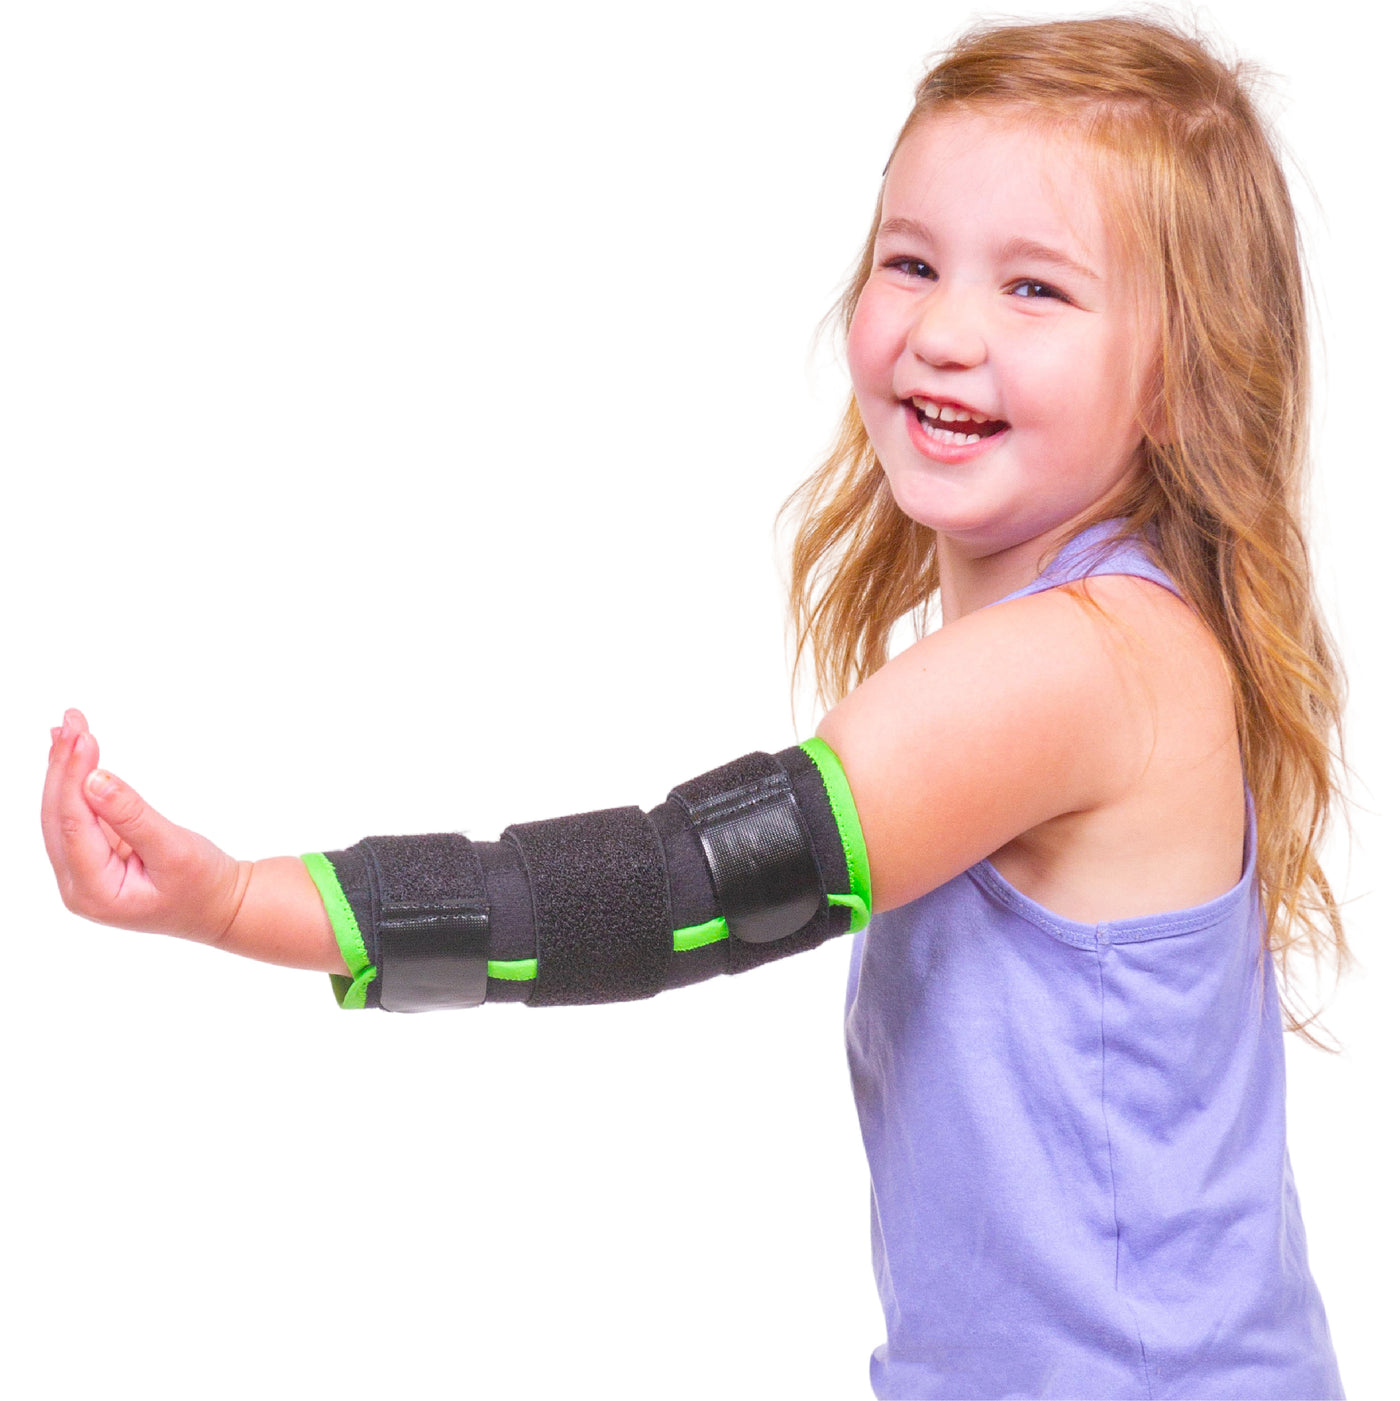 The BraceAbility Kids Thumb Sucking Guard prevents children from sticking their fingers or thumb in their mouth